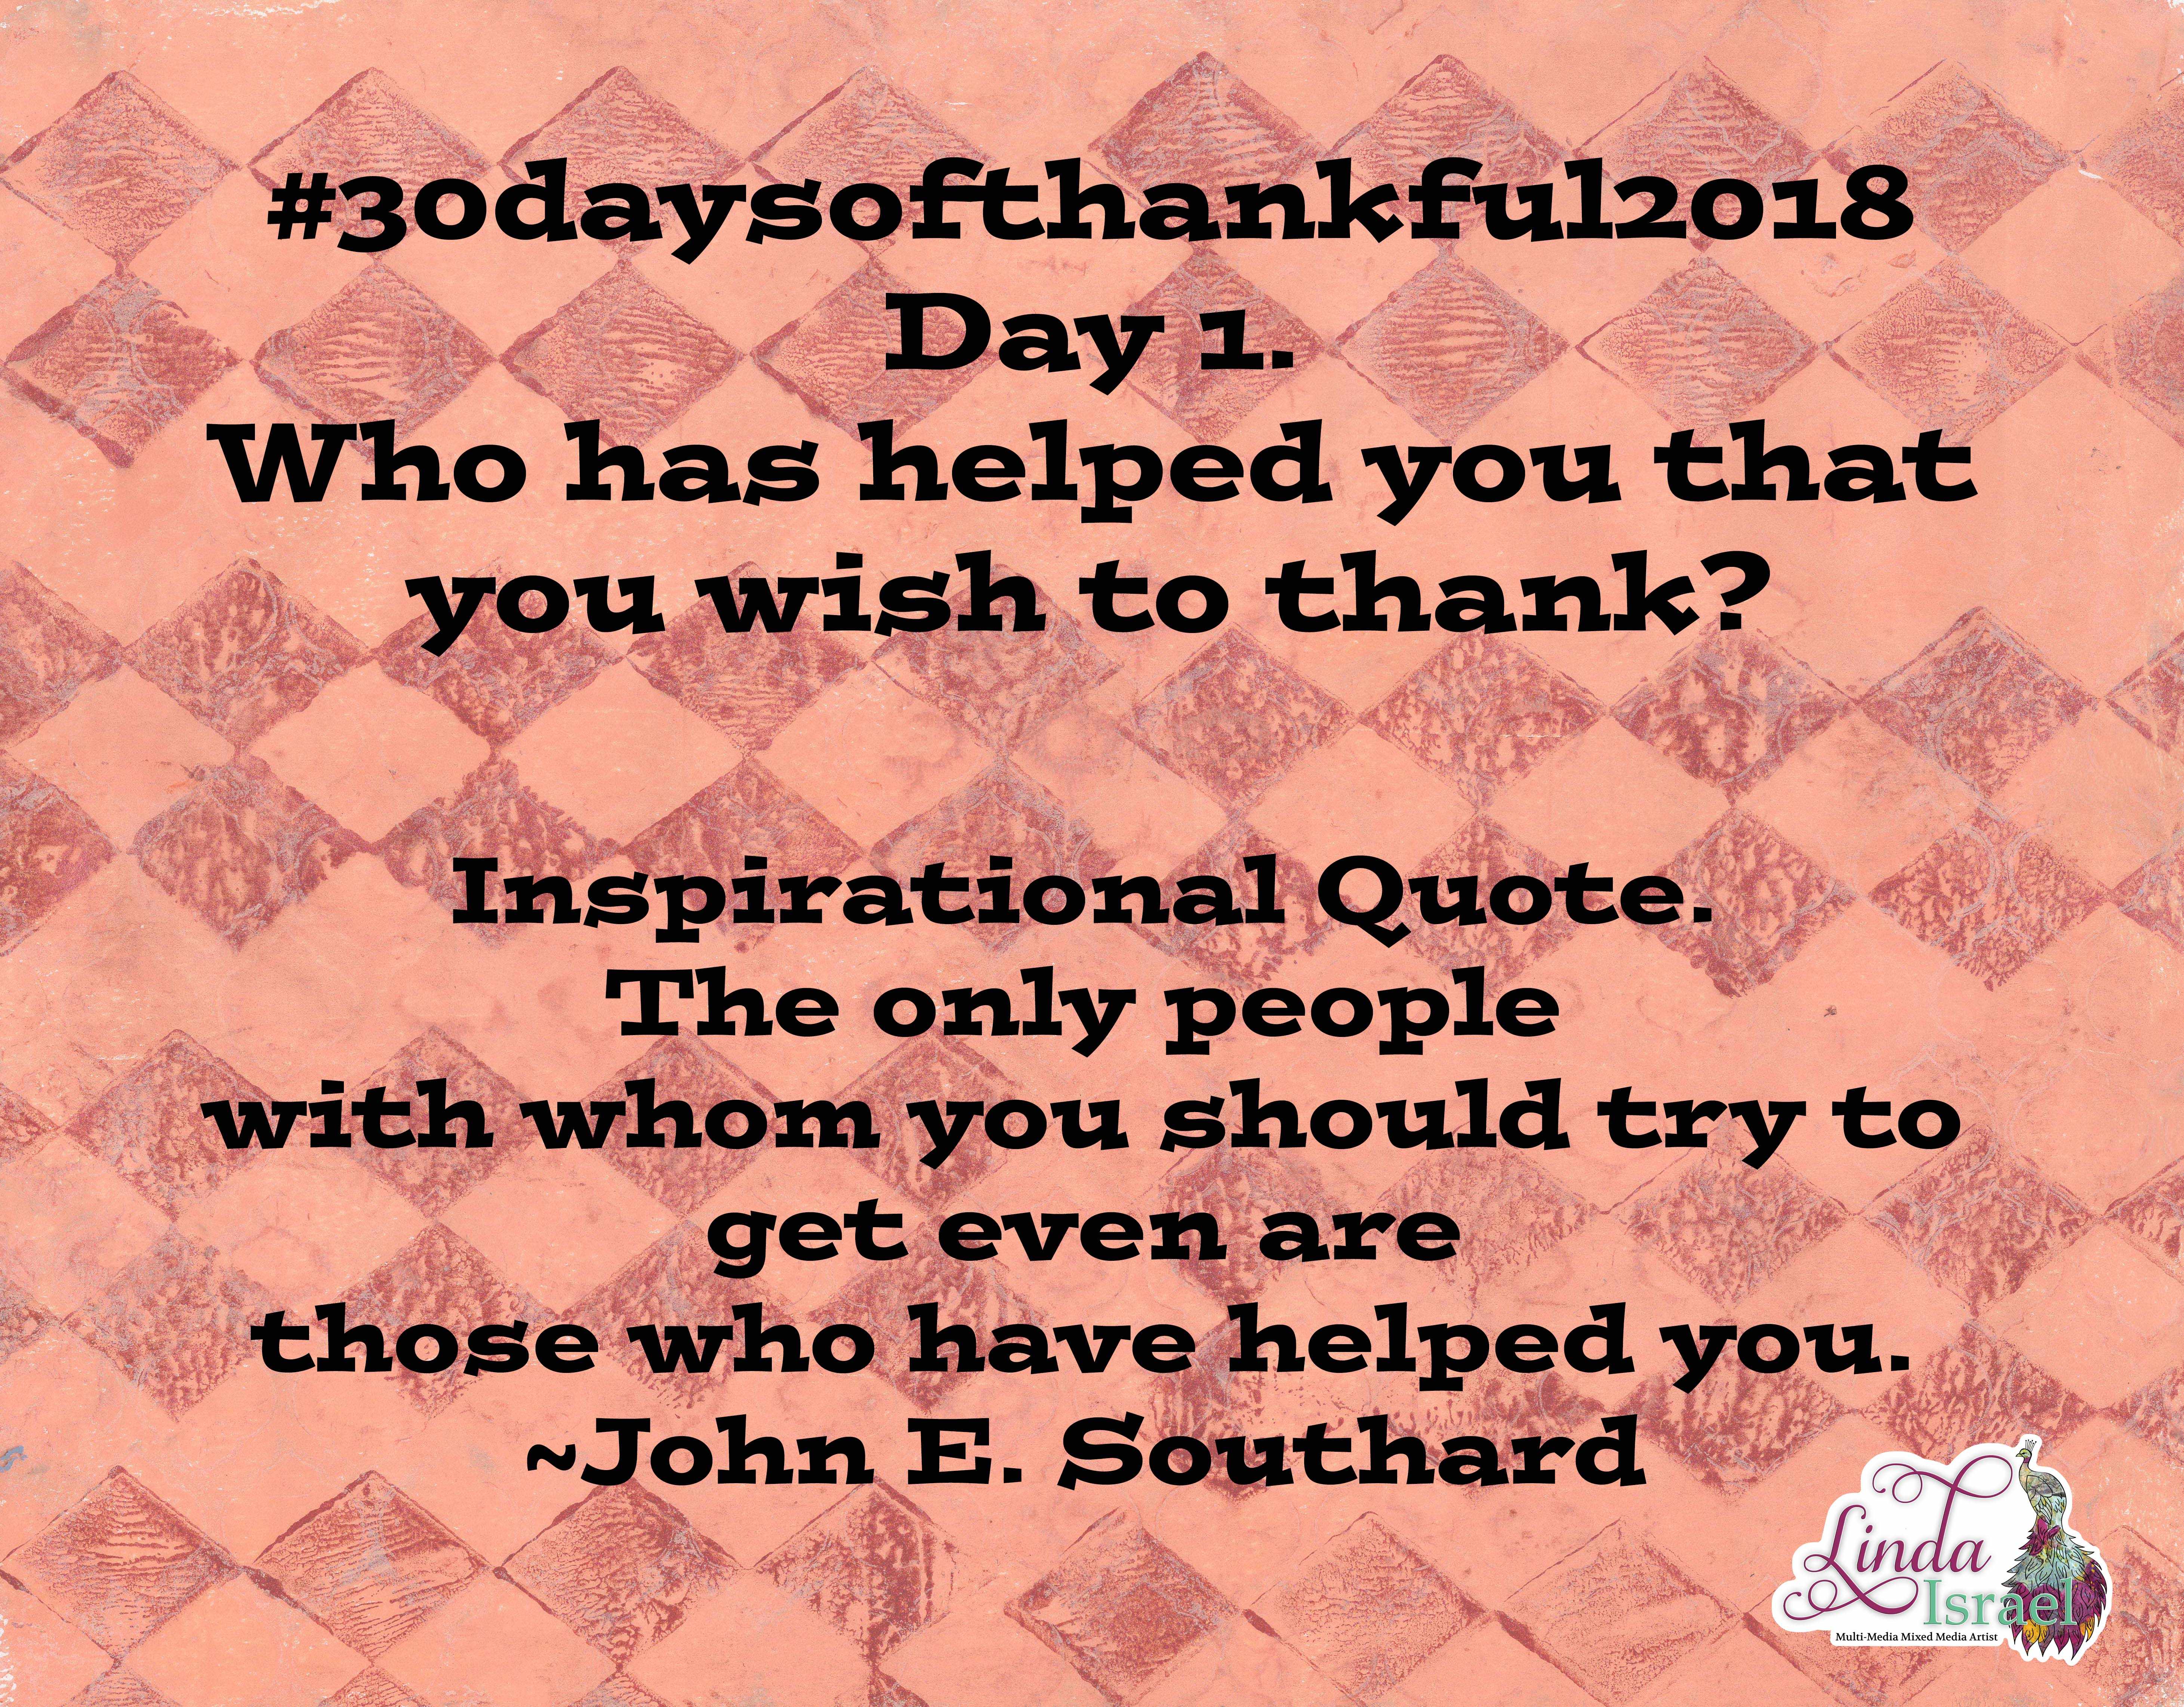 Day 1 of 30 days of Thankful 2018